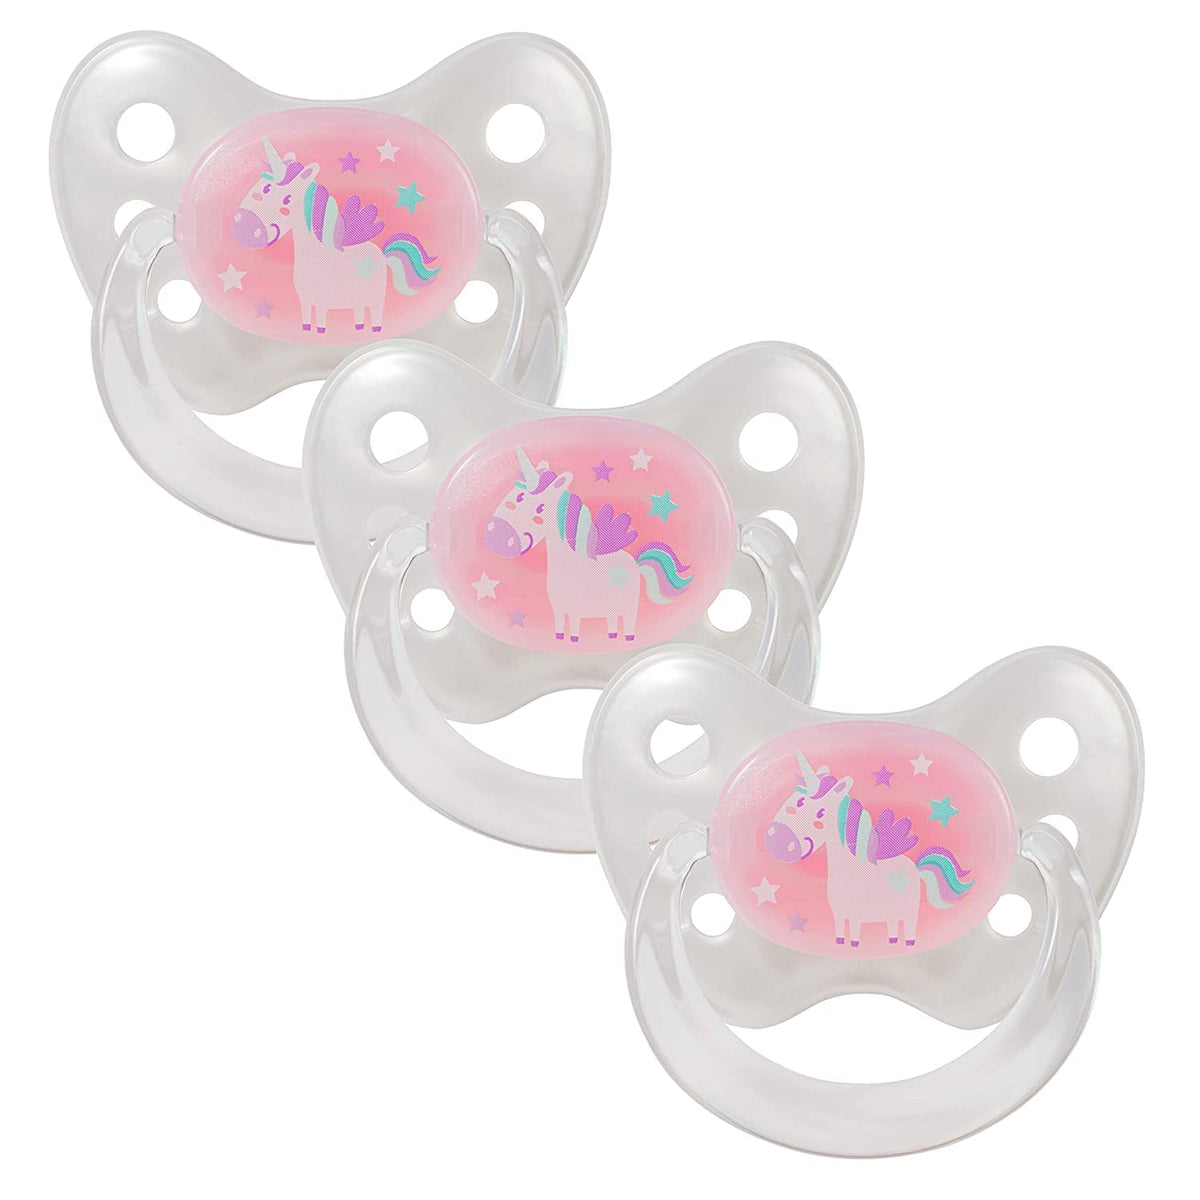 Dentistar® Silicone Soother Set of 3 - Size 1 for 0-6 Months - Tooth and Jaw Friendly Silicone Soother with Dental Step - White with Unicorn Motif - BPA Free Baby Accessories - Made in Germany